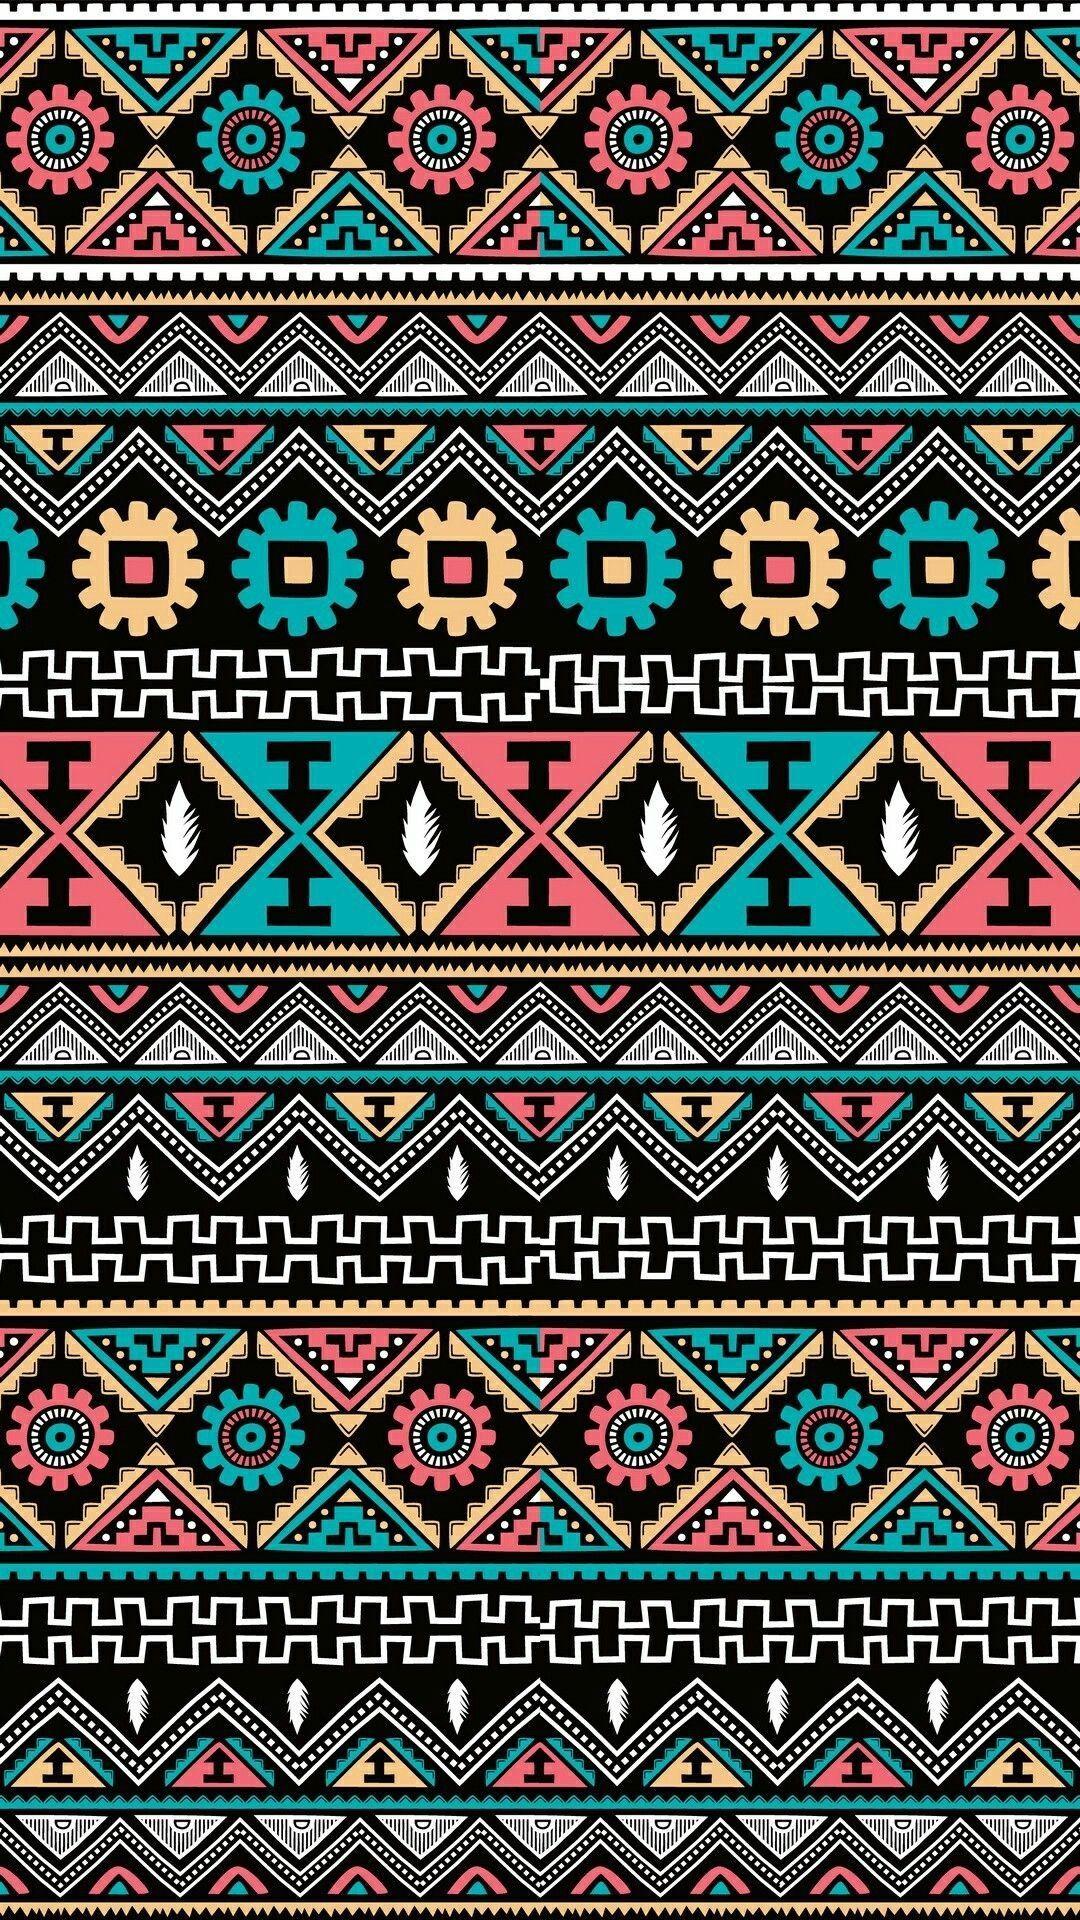 Ancient Aztec Wallpaper - custom wallpapers by Wallvy. Worldwide shipping!